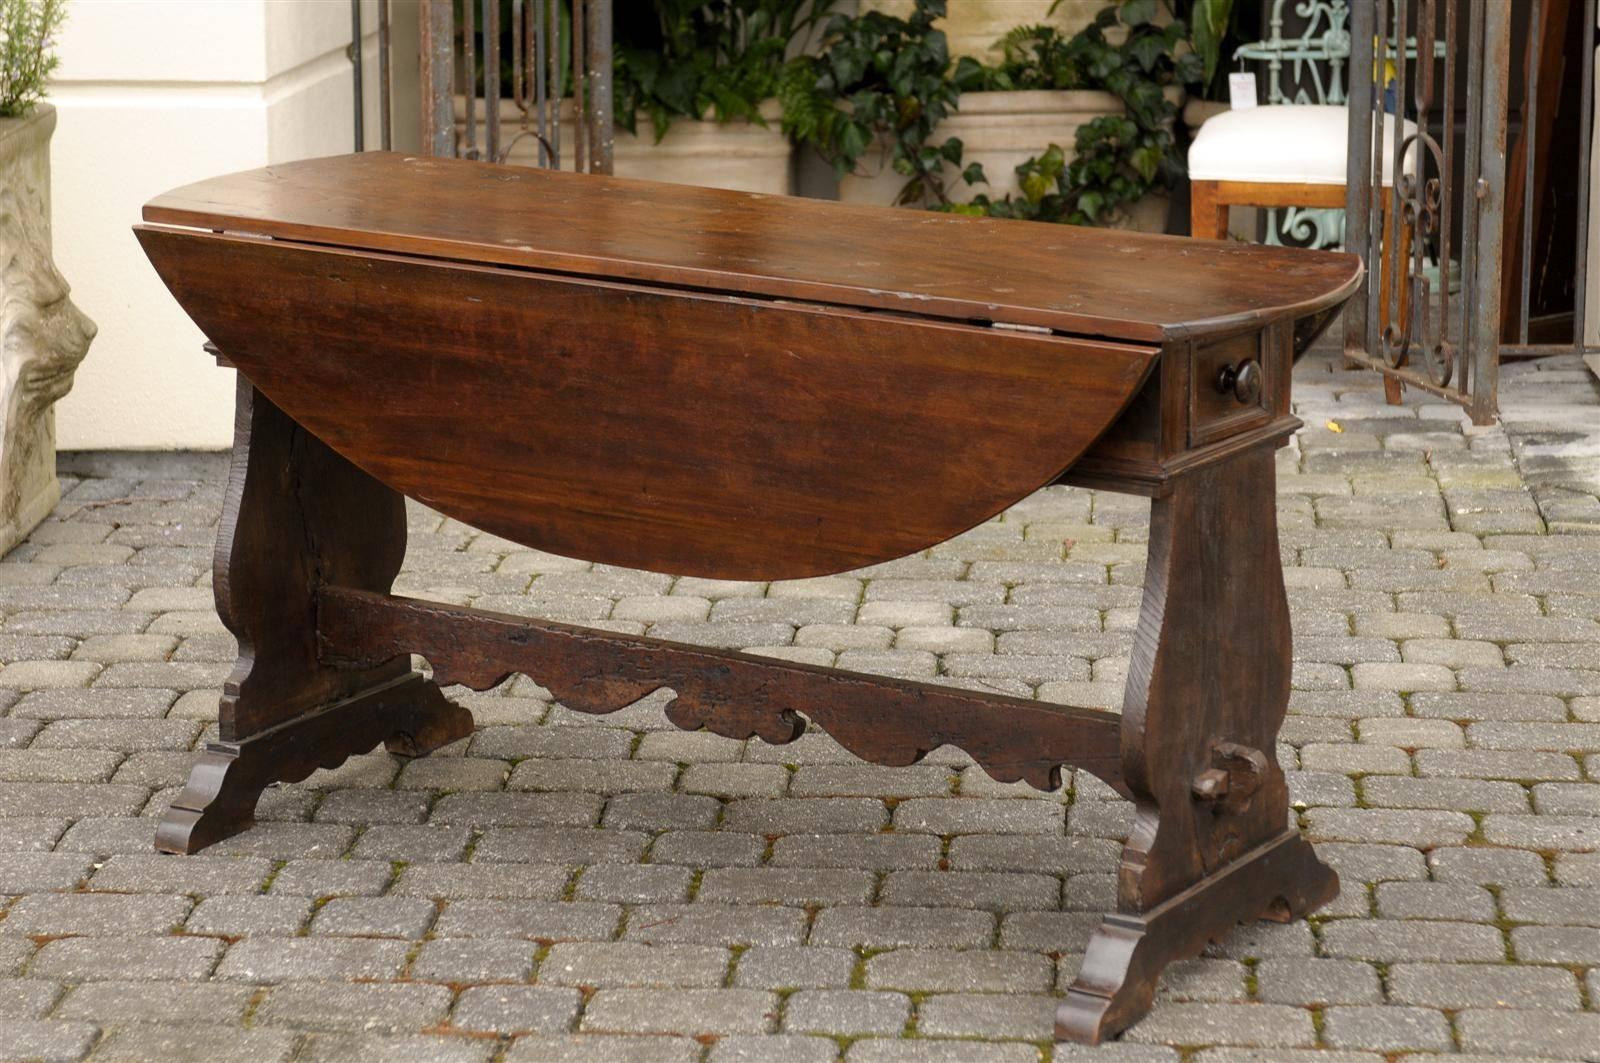 Oval 18th century Italian walnut drop-leaf table. This Italian table features an oval drop-leaf top. The top sits on a trestle base adorned with a nicely carved cross stretcher.  Each leaf is 12.5 inches, giving this table a depth of 30.25 inches